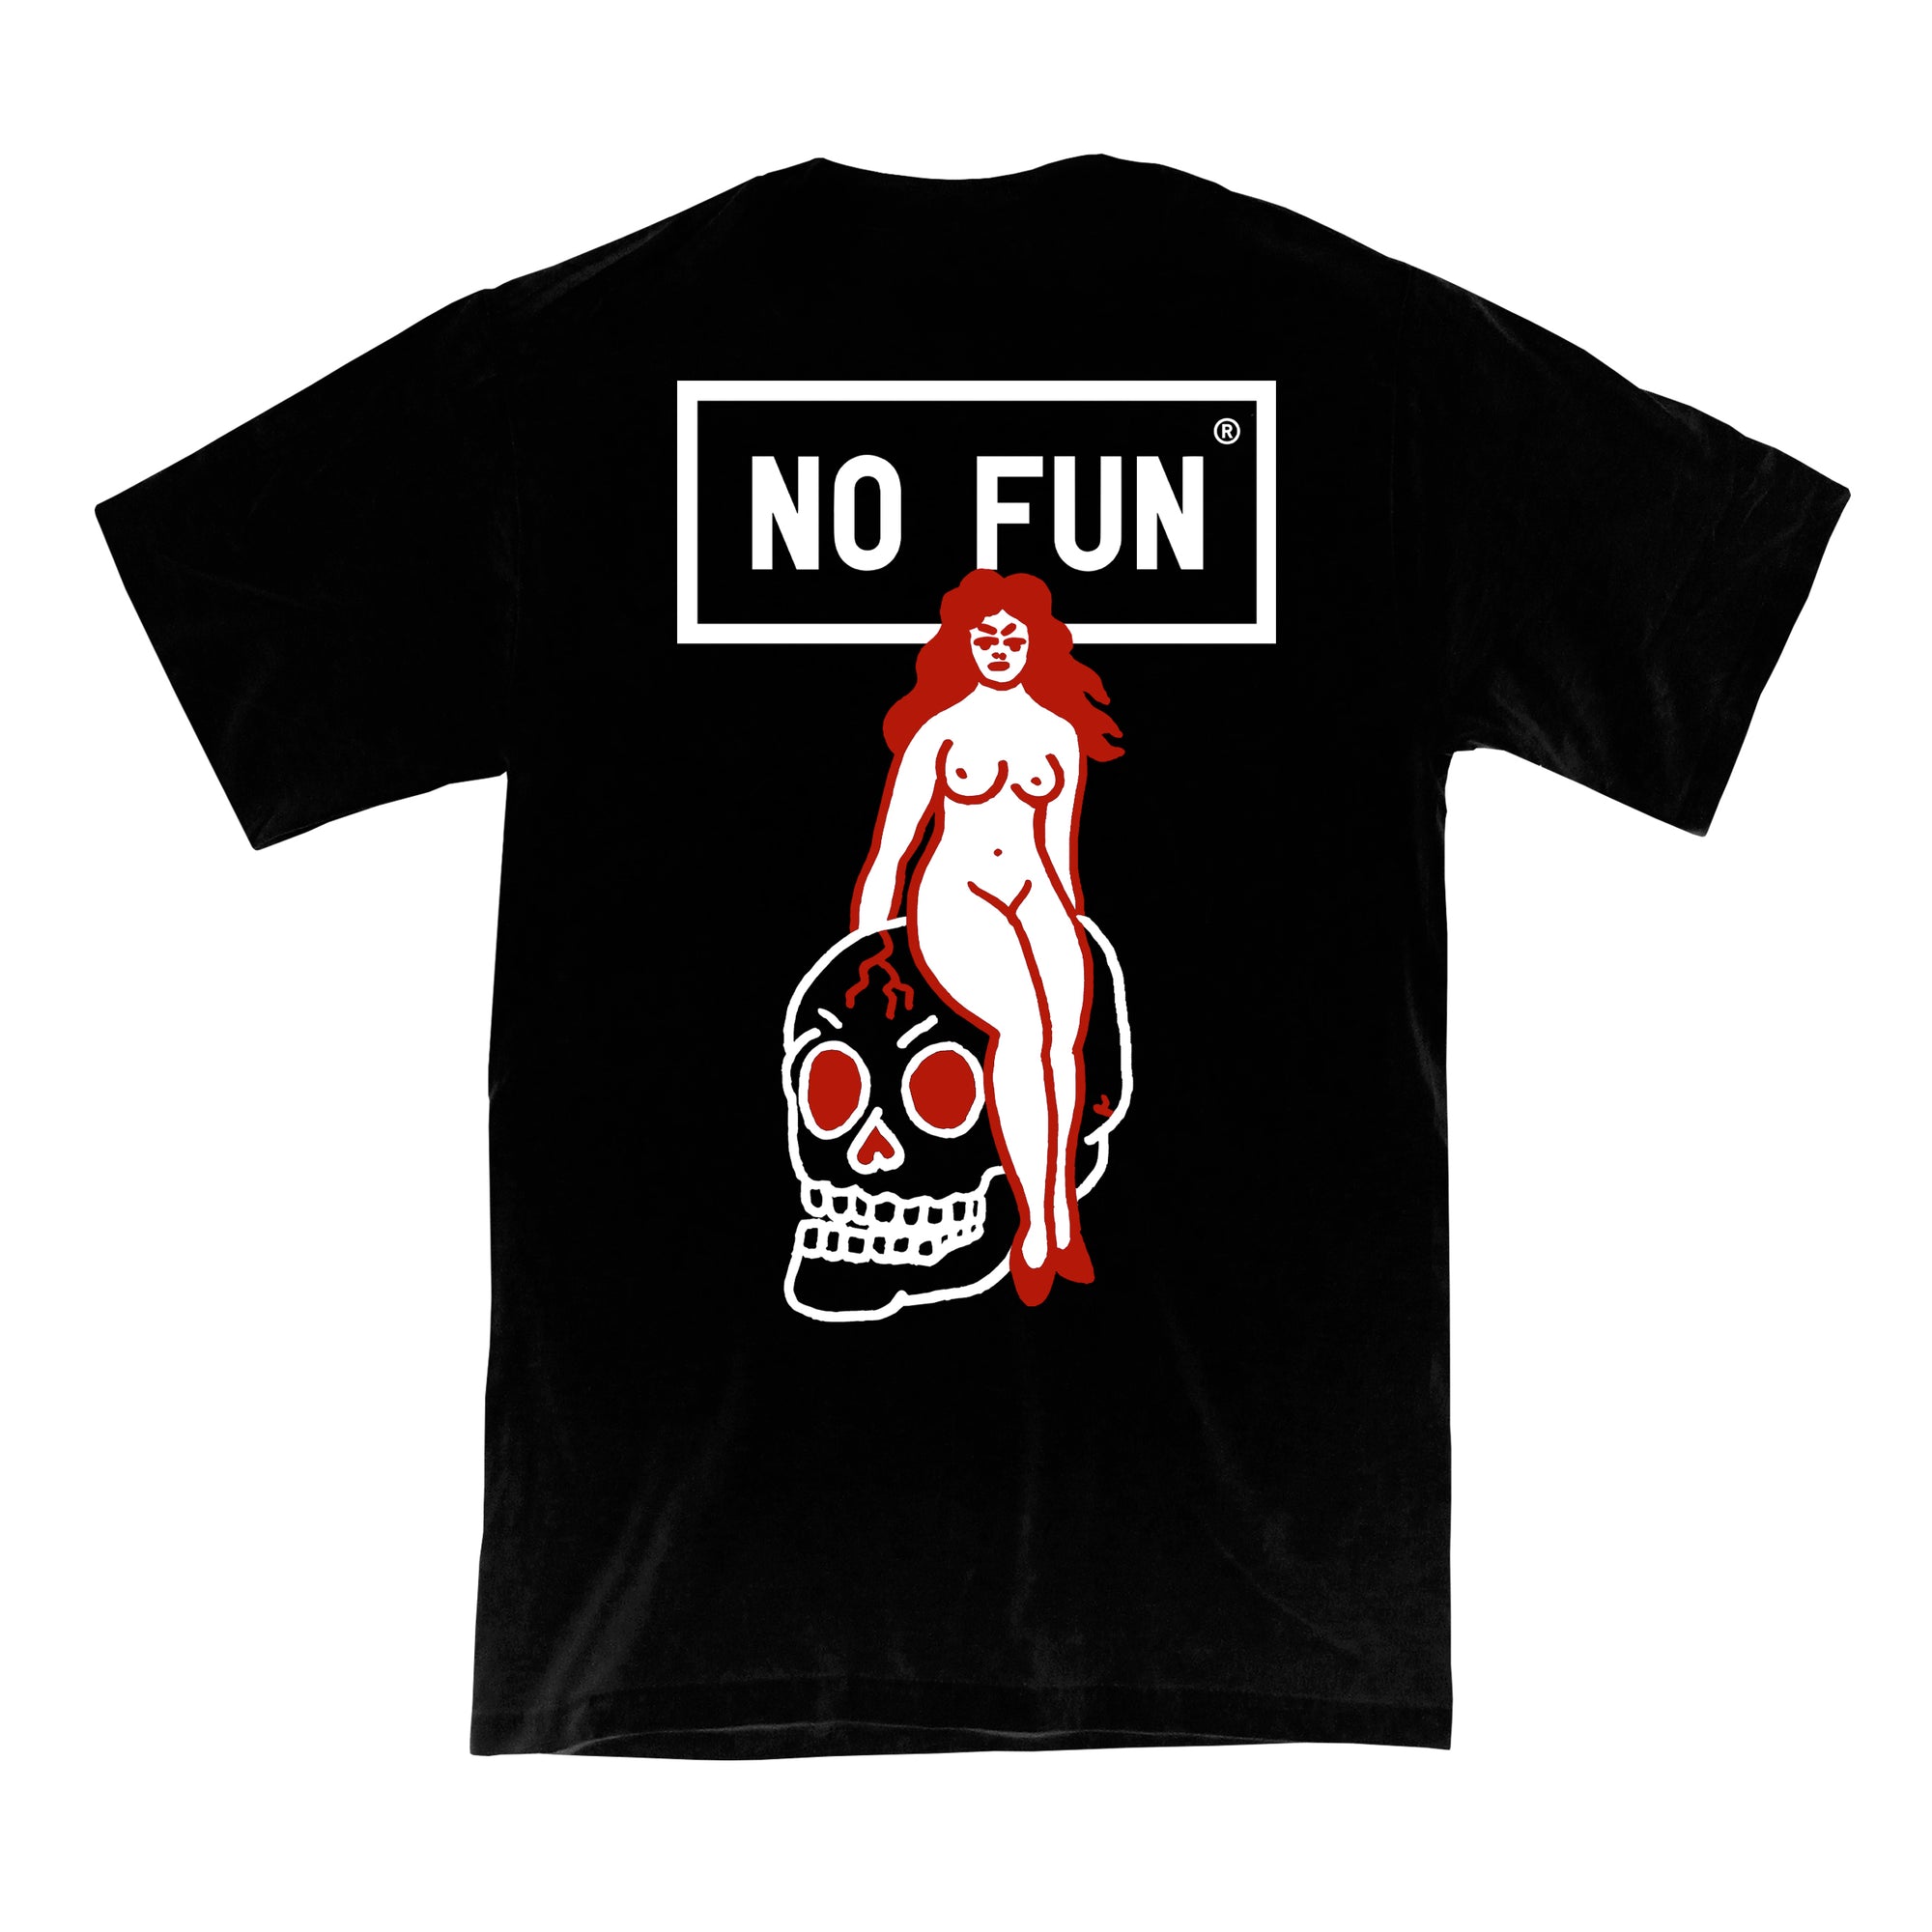 Photo of the back of the "No Fun®" "Bleeding Hearts" T-shirt. The t-shirt is black and photographed against a white background. The back graphic includes a large, white "No Fun" logo. Underneath the logo there is an illustration of a naked woman sitting on an oversized skull. The graphic spans the entire back of the shirt.